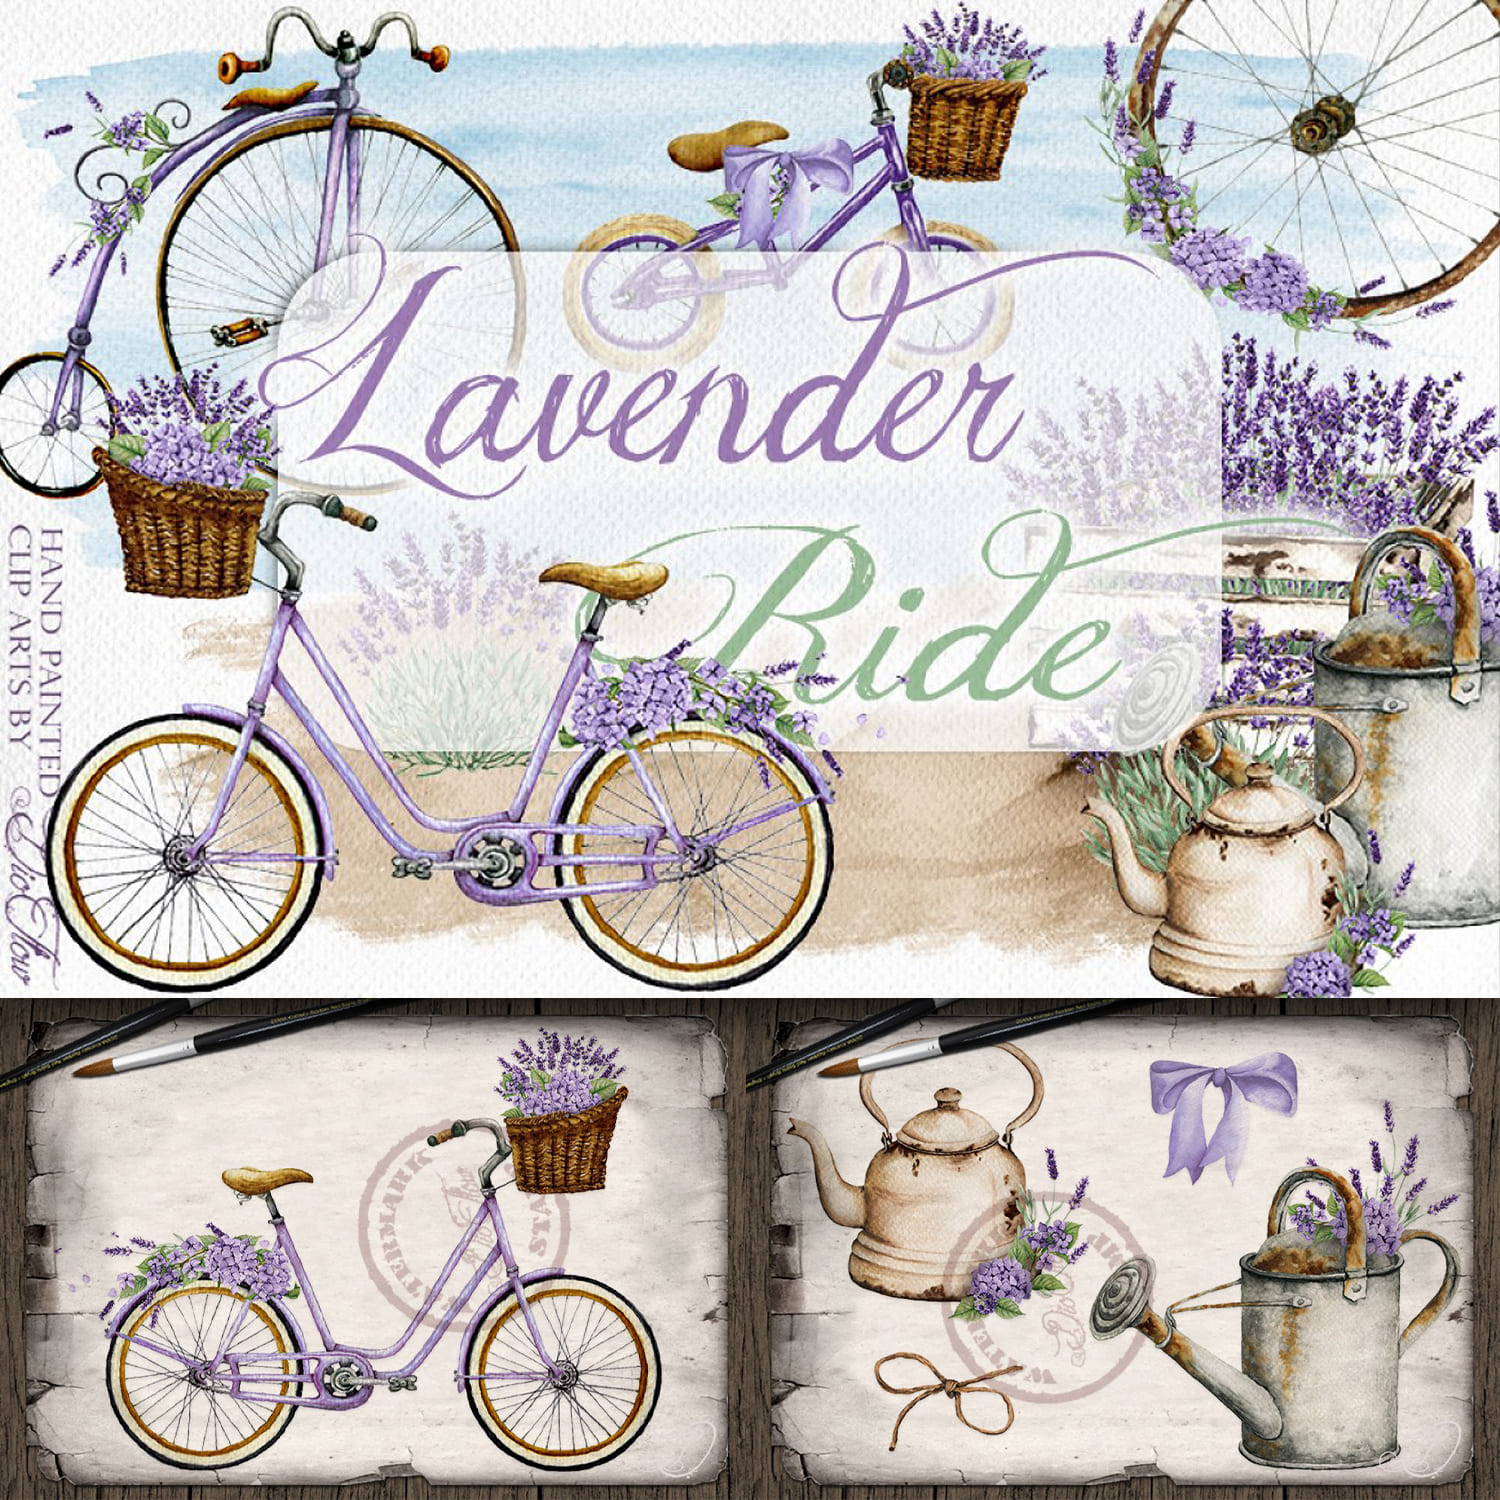 Lavender Ride Bicycle Illustration cover.